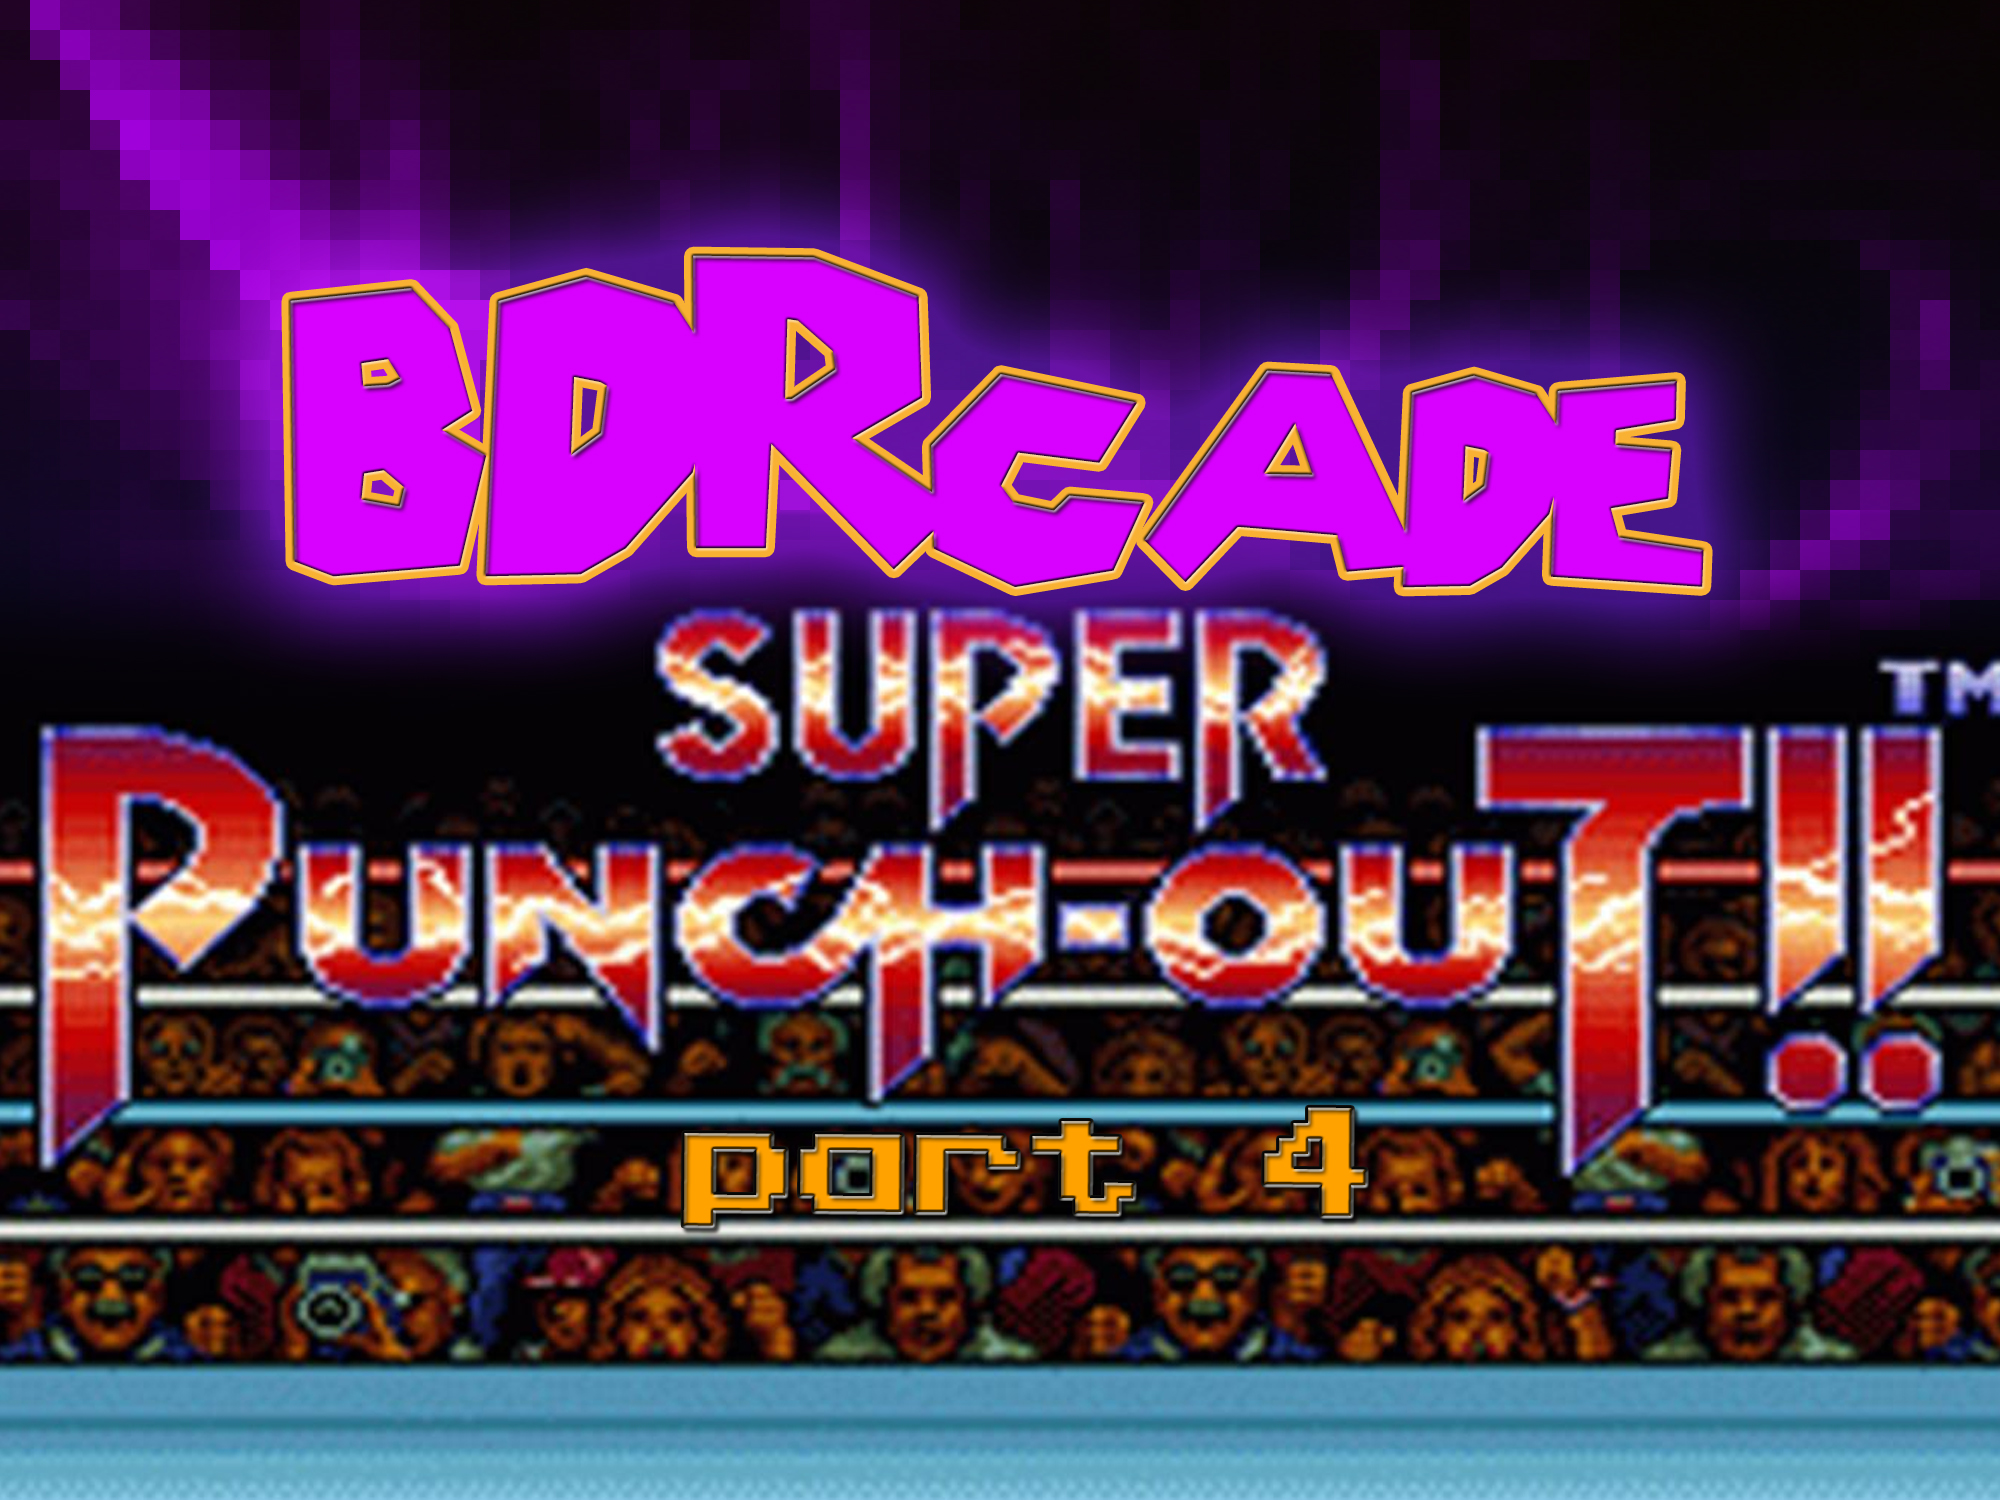 Super Punch-Out: I Thought You Were Califooorniiaaaa – PART 4 – BDRcade